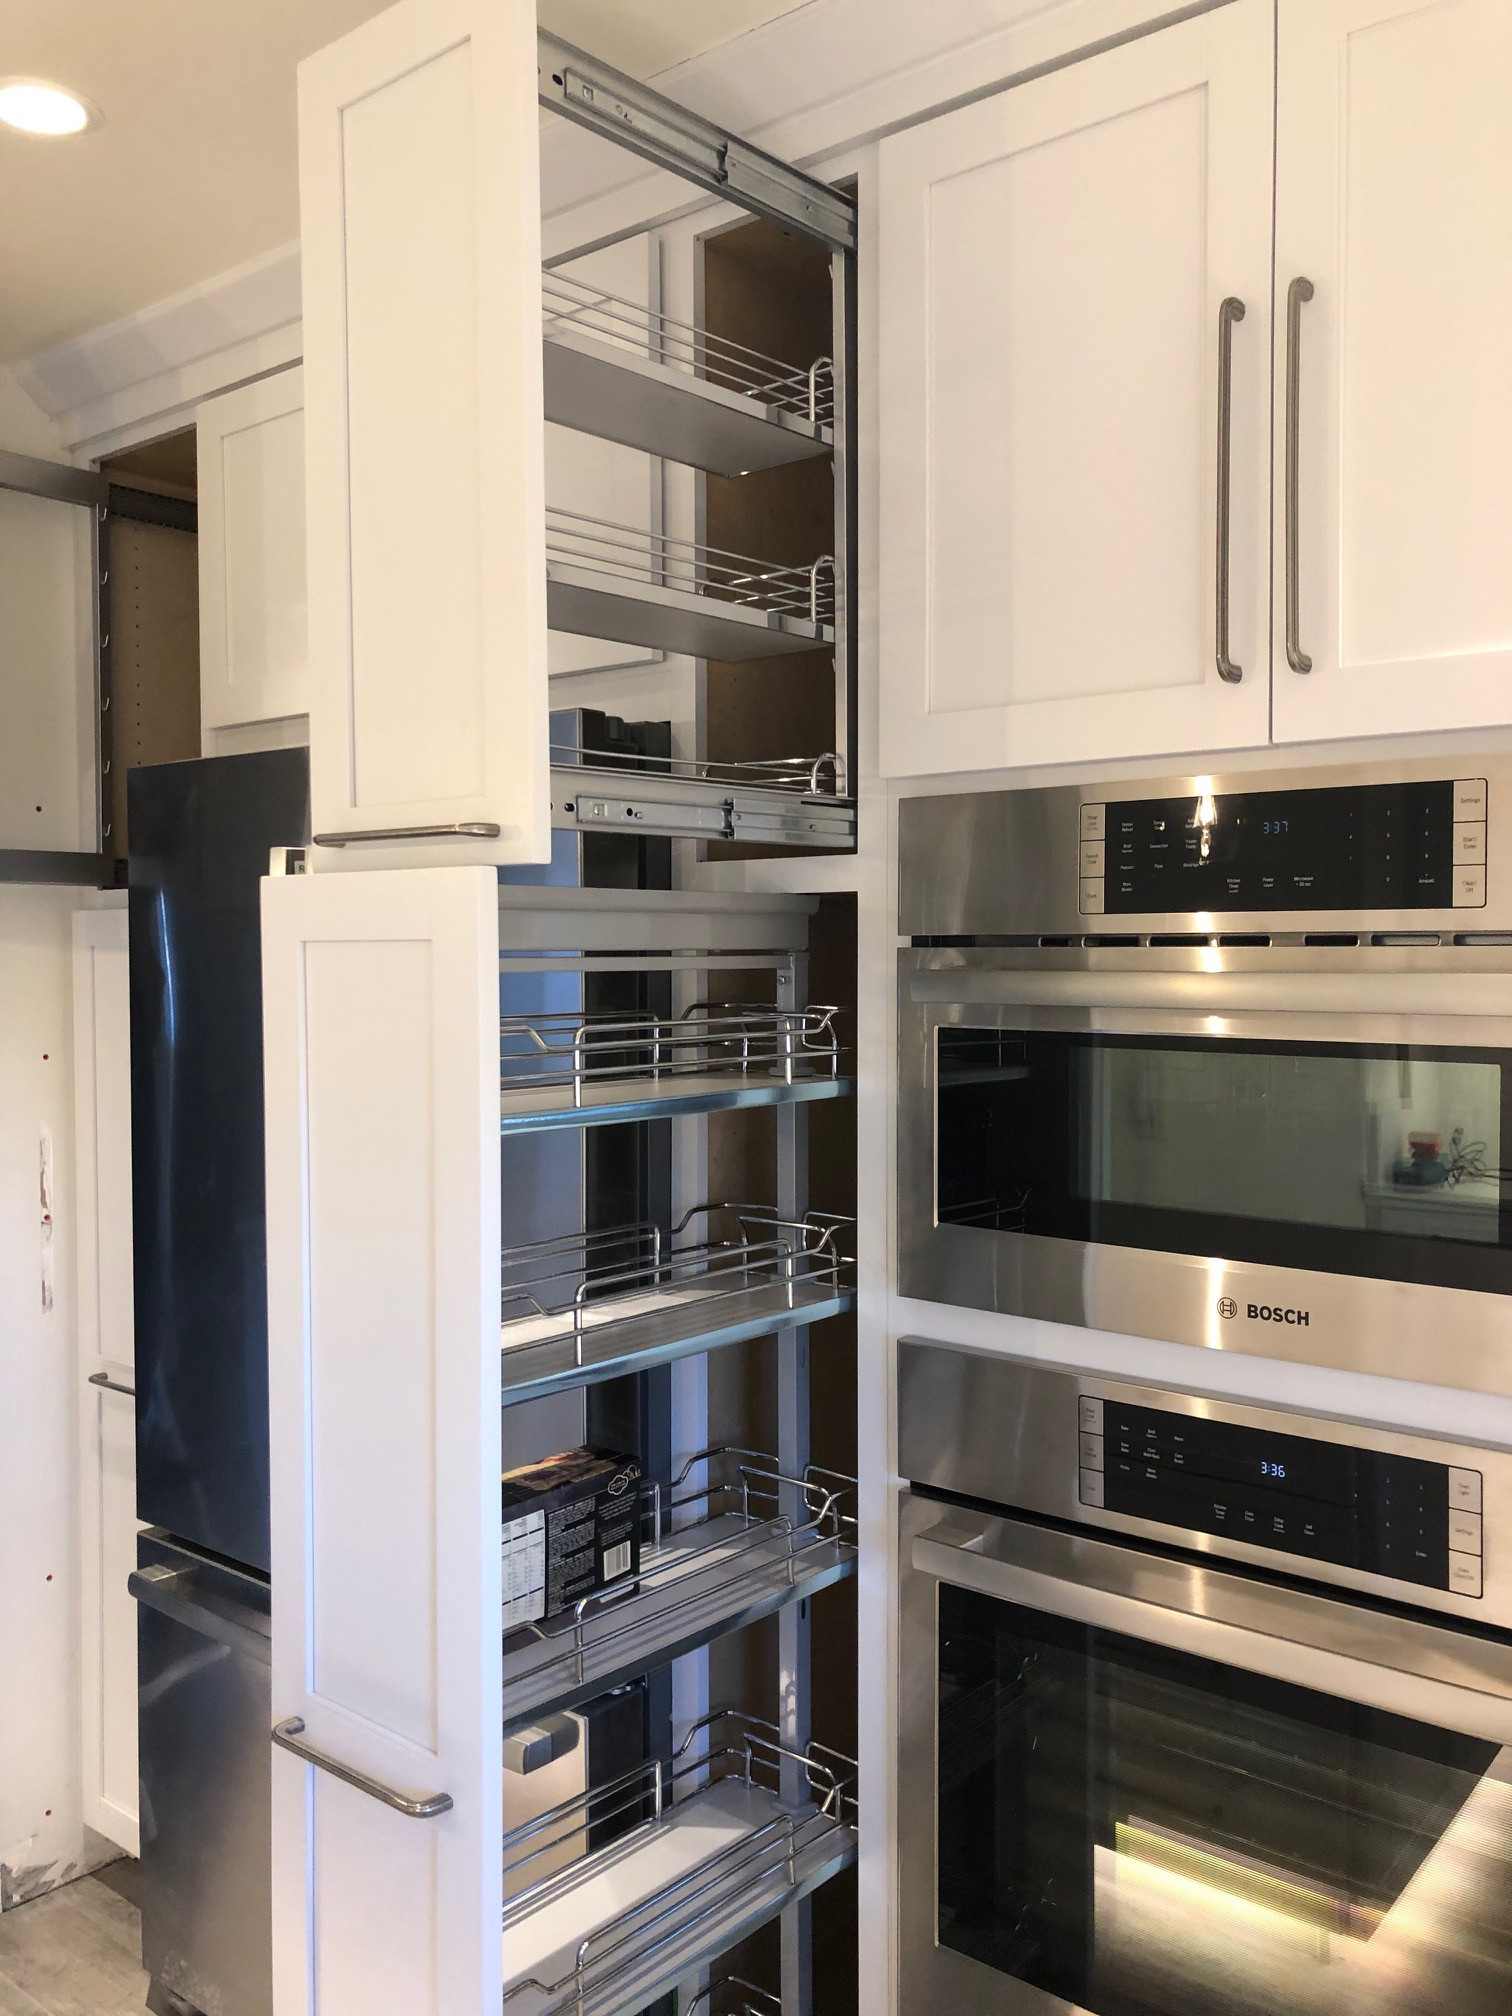 pantry space